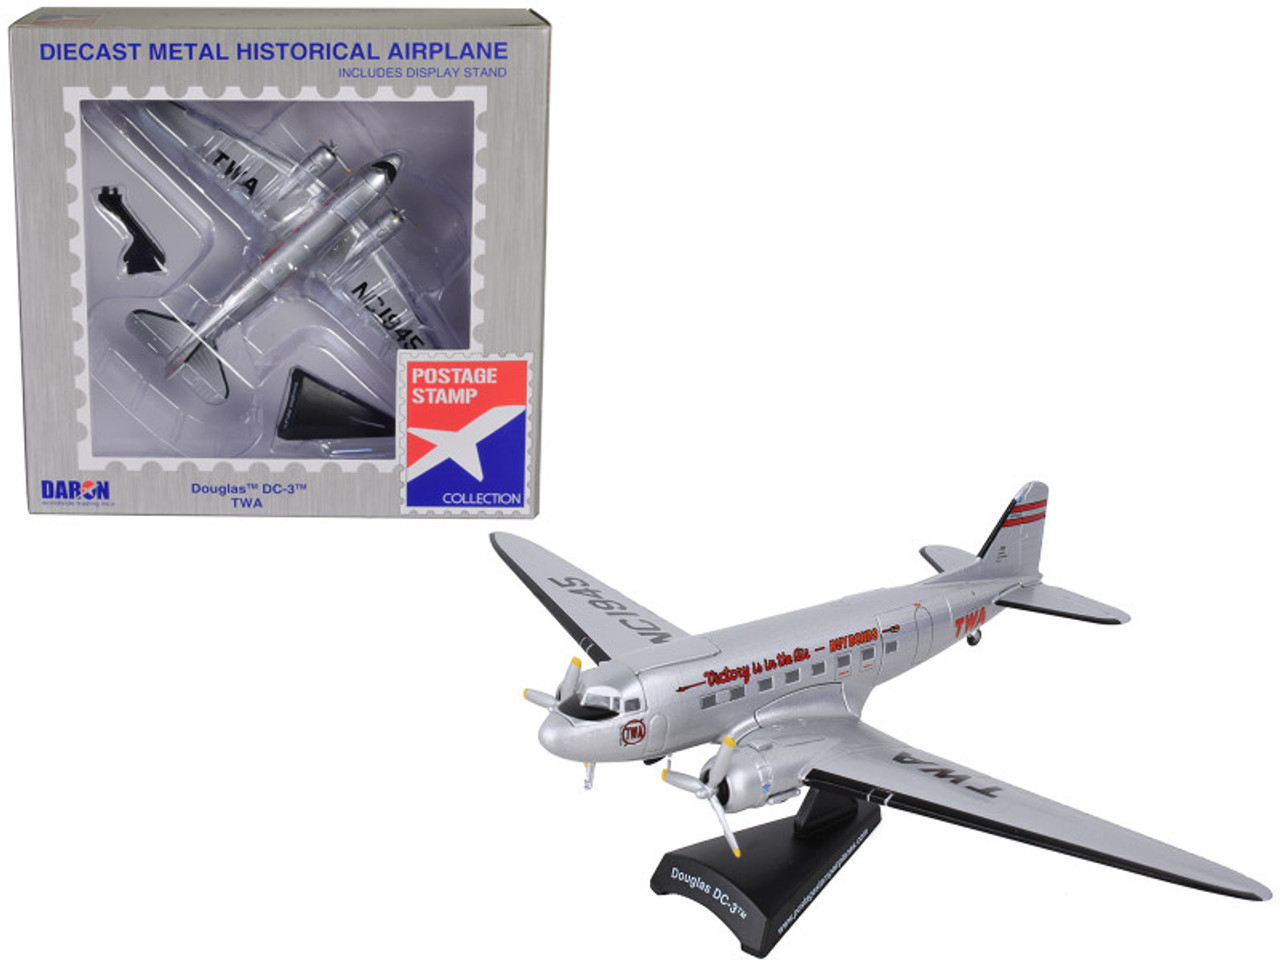 Douglas DC-3 Passenger Aircraft "Trans World Airlines - Victory is in the Air" 1/144 Diecast Model Airplane by Postage Stamp